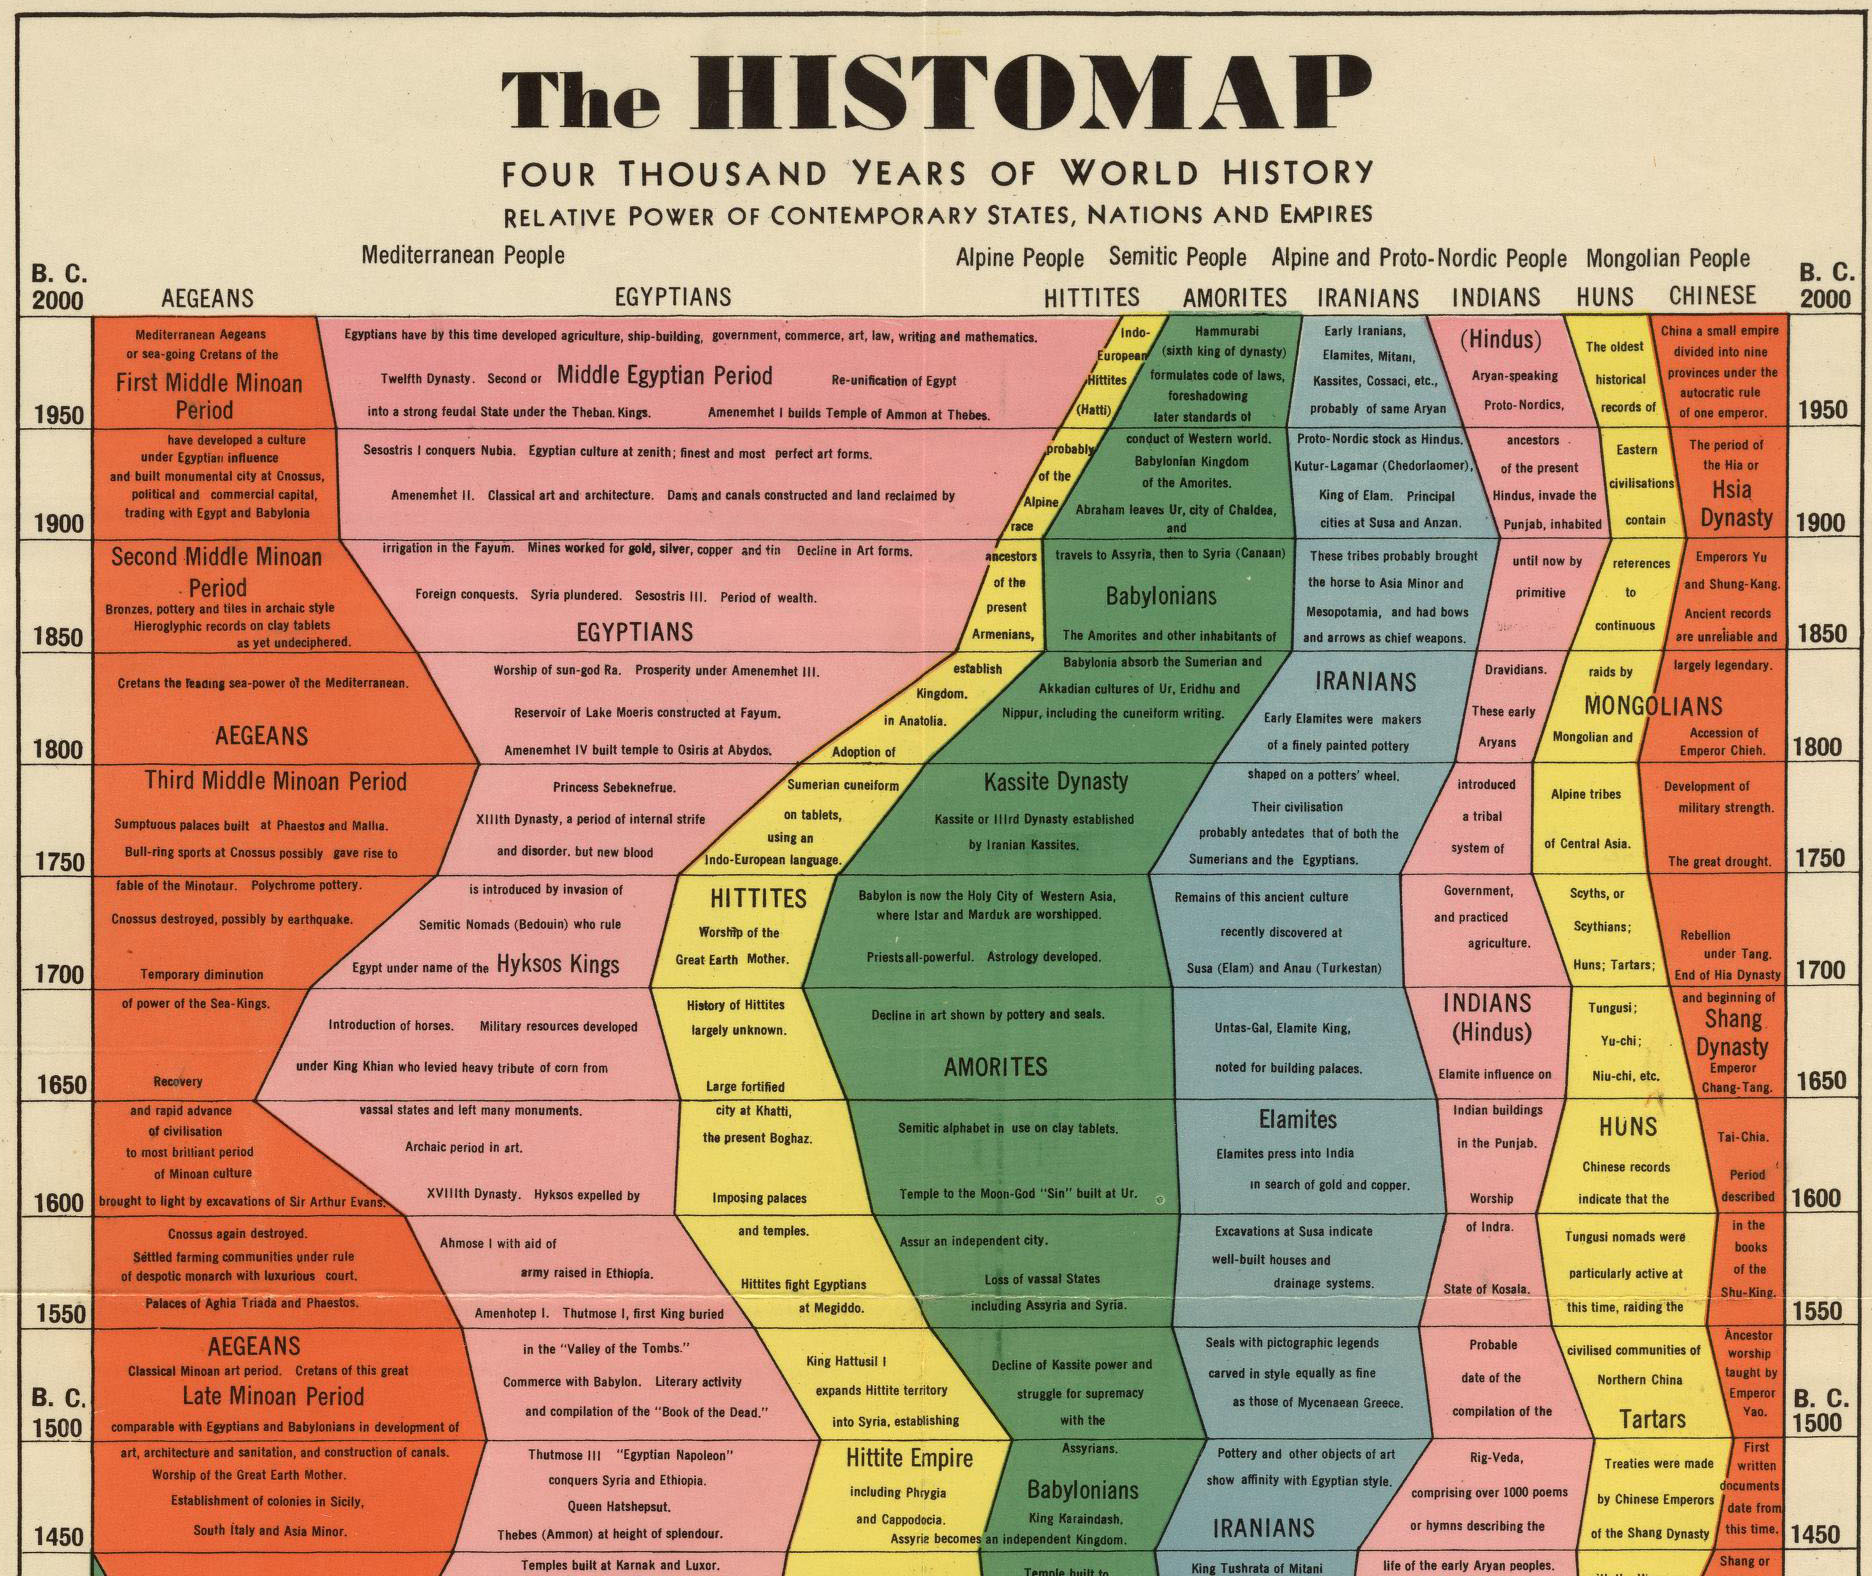 “The Histomap: 4000 Years of World History” is the Story of Civilization